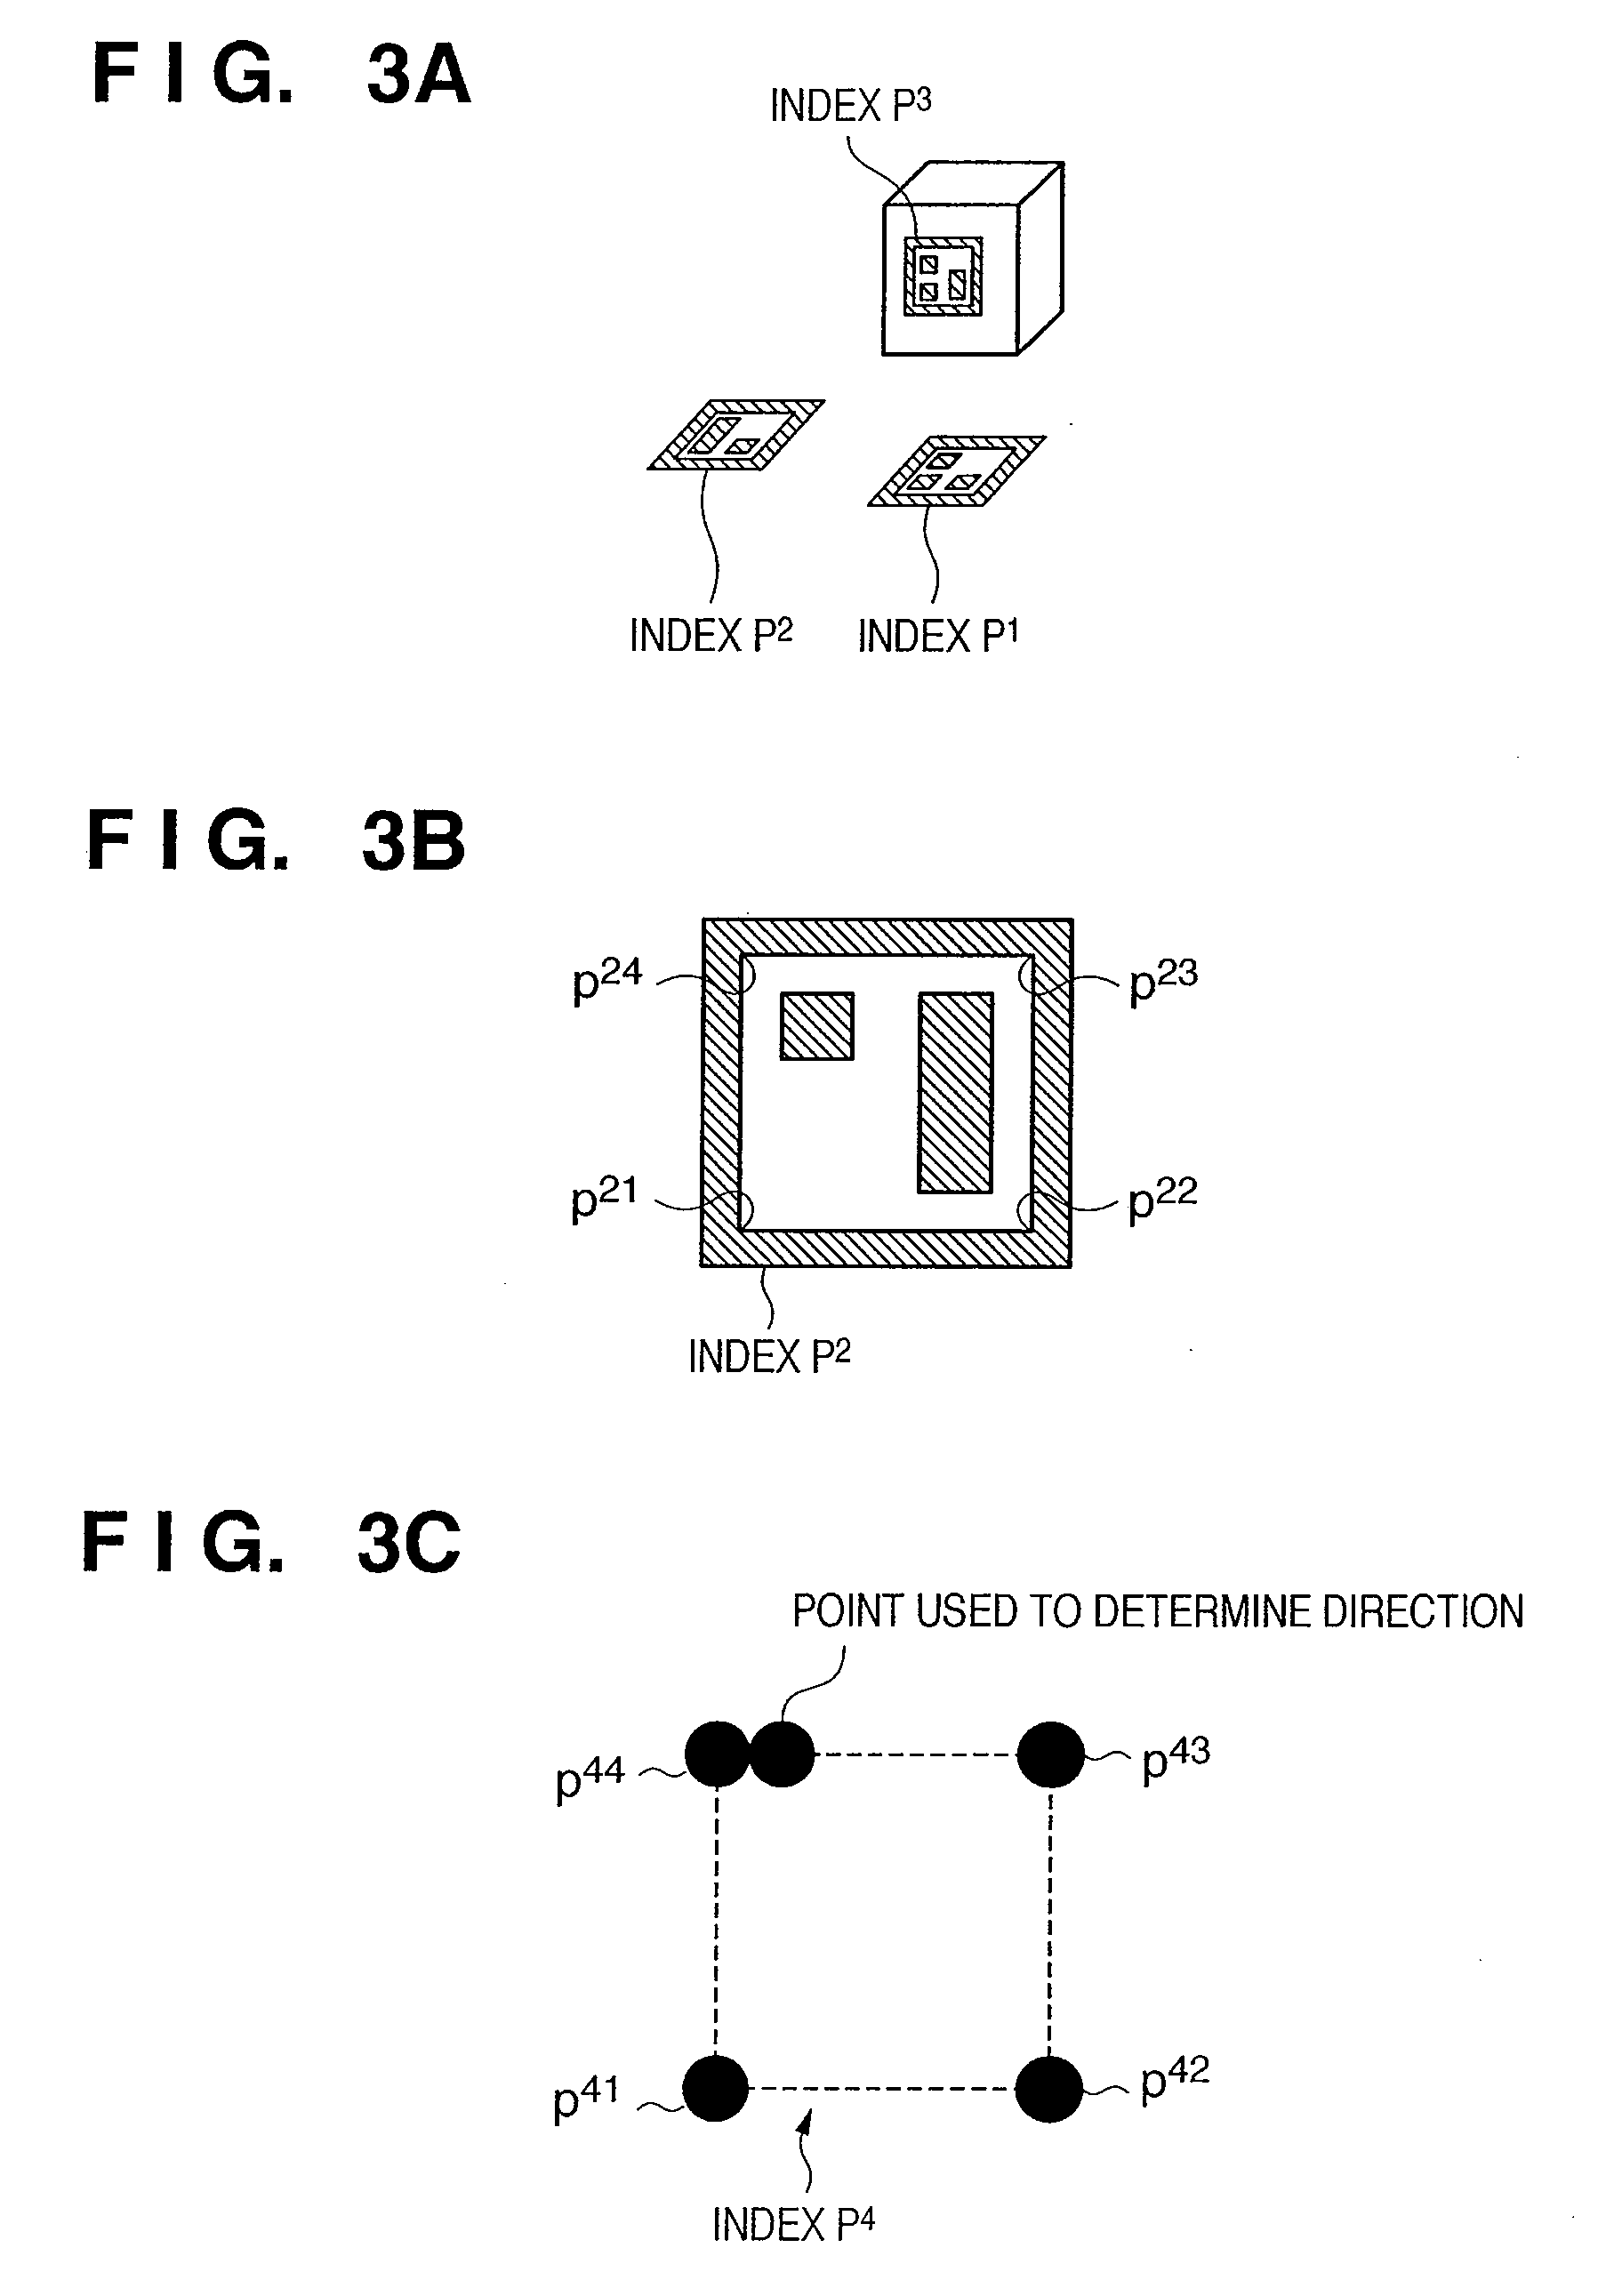 Position and orientation measurement method and apparatus